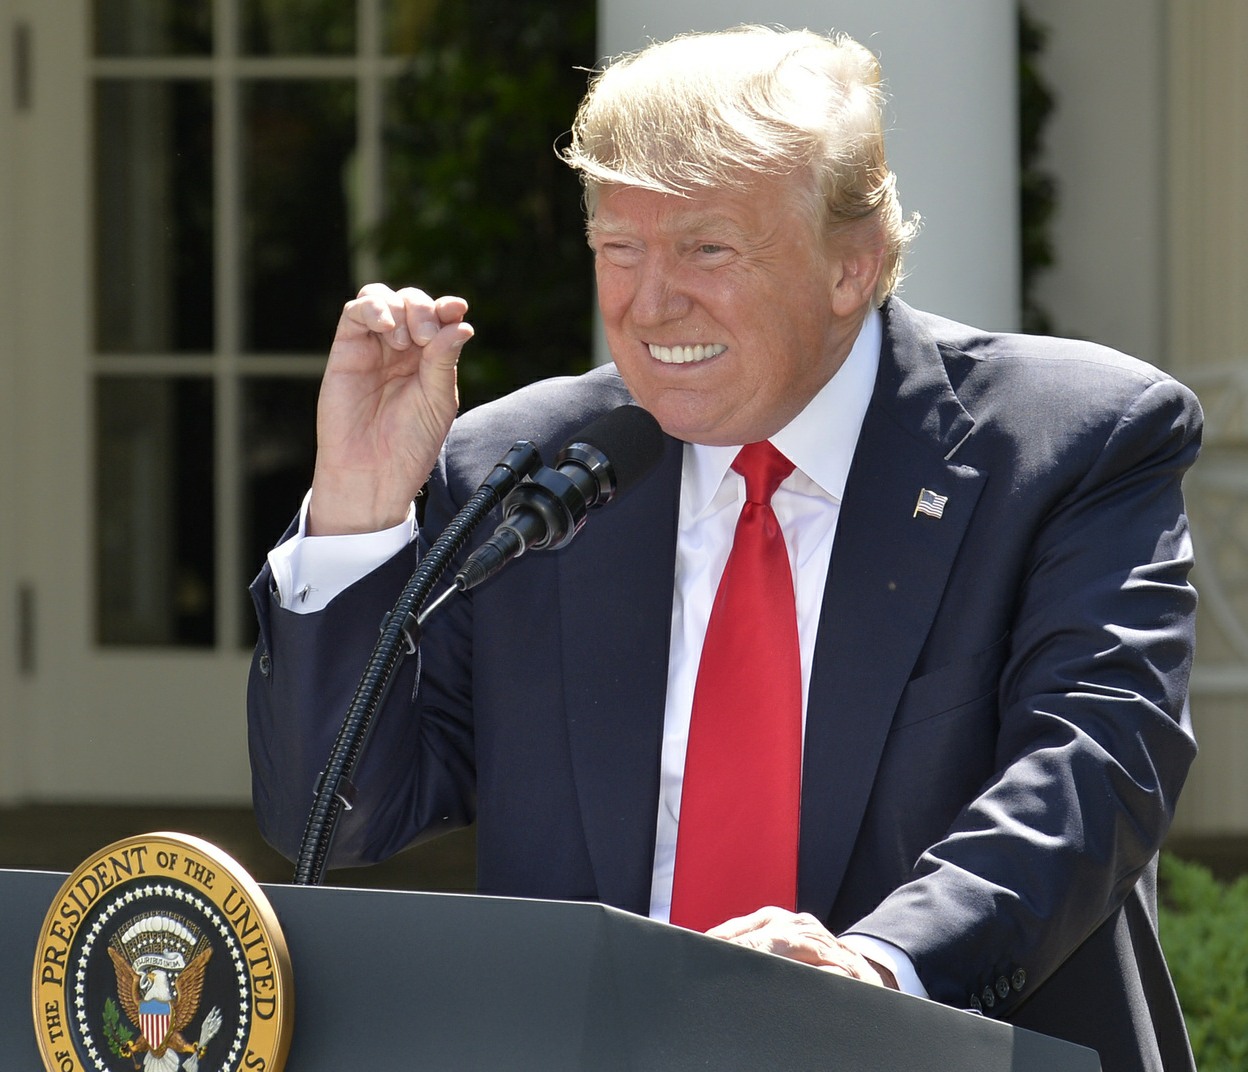 U.S. President Donald Trump gestures as he explains his decision to pull the United States out of the Paris Climate Agreement at the White House